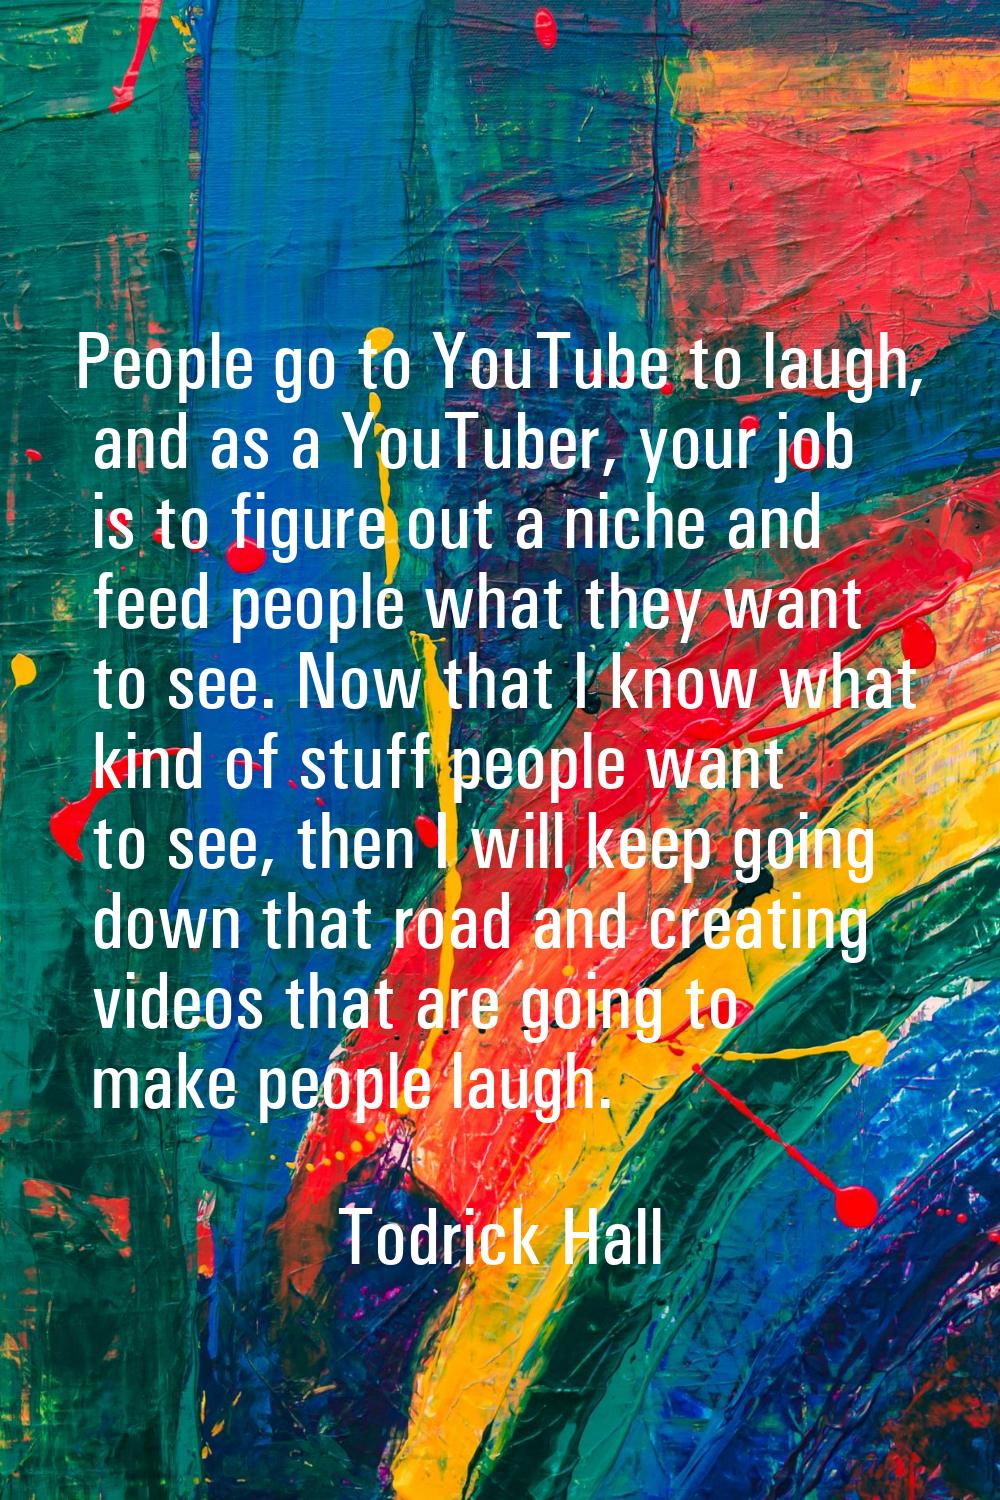 People go to YouTube to laugh, and as a YouTuber, your job is to figure out a niche and feed people